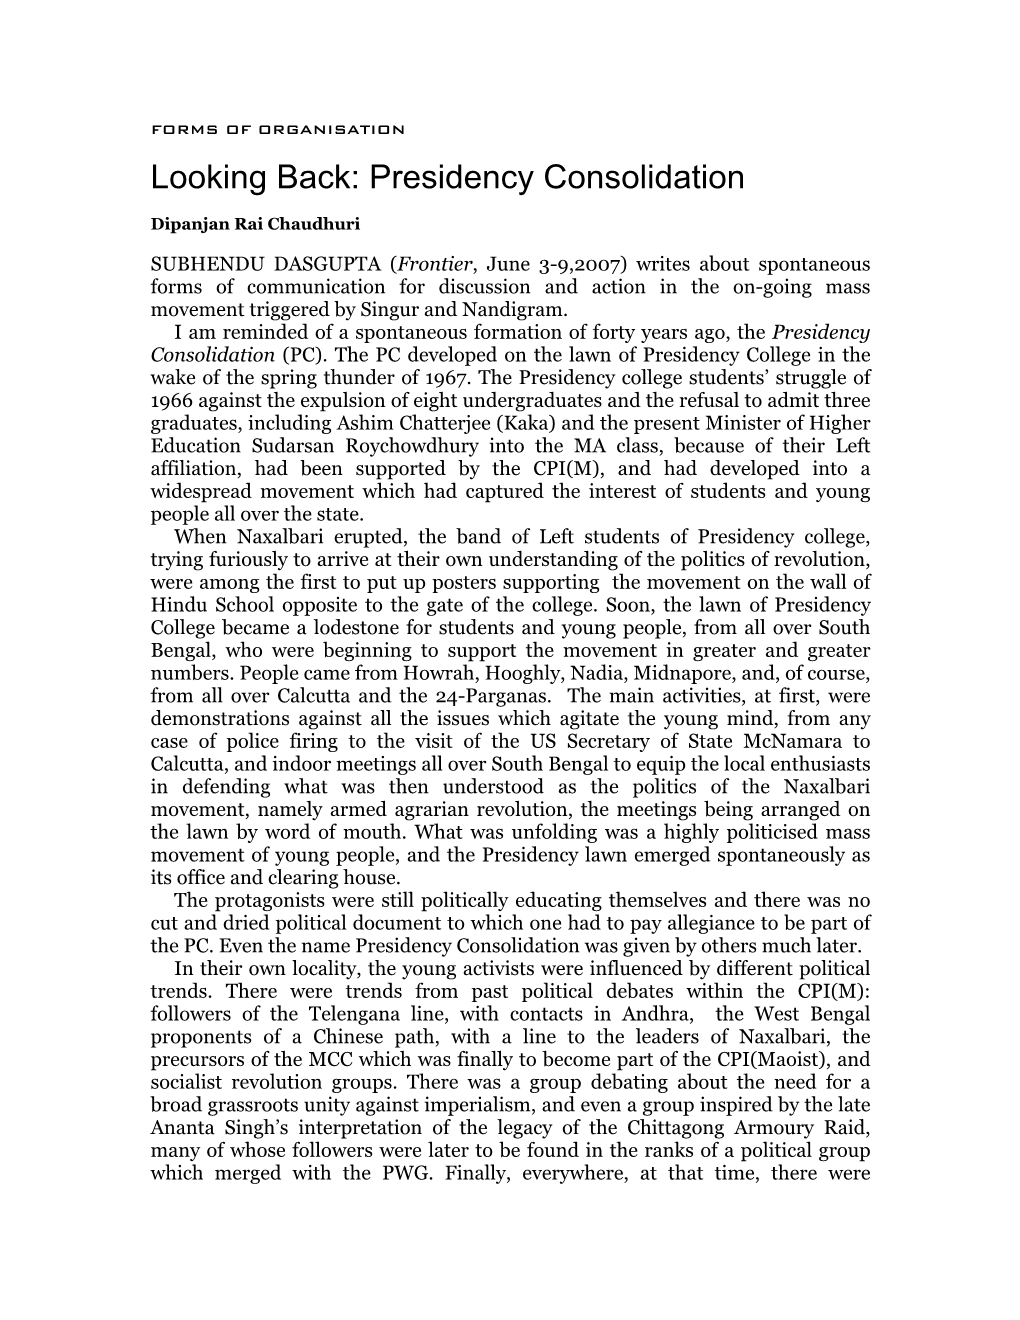 Looking Back : Presidency Consolidation